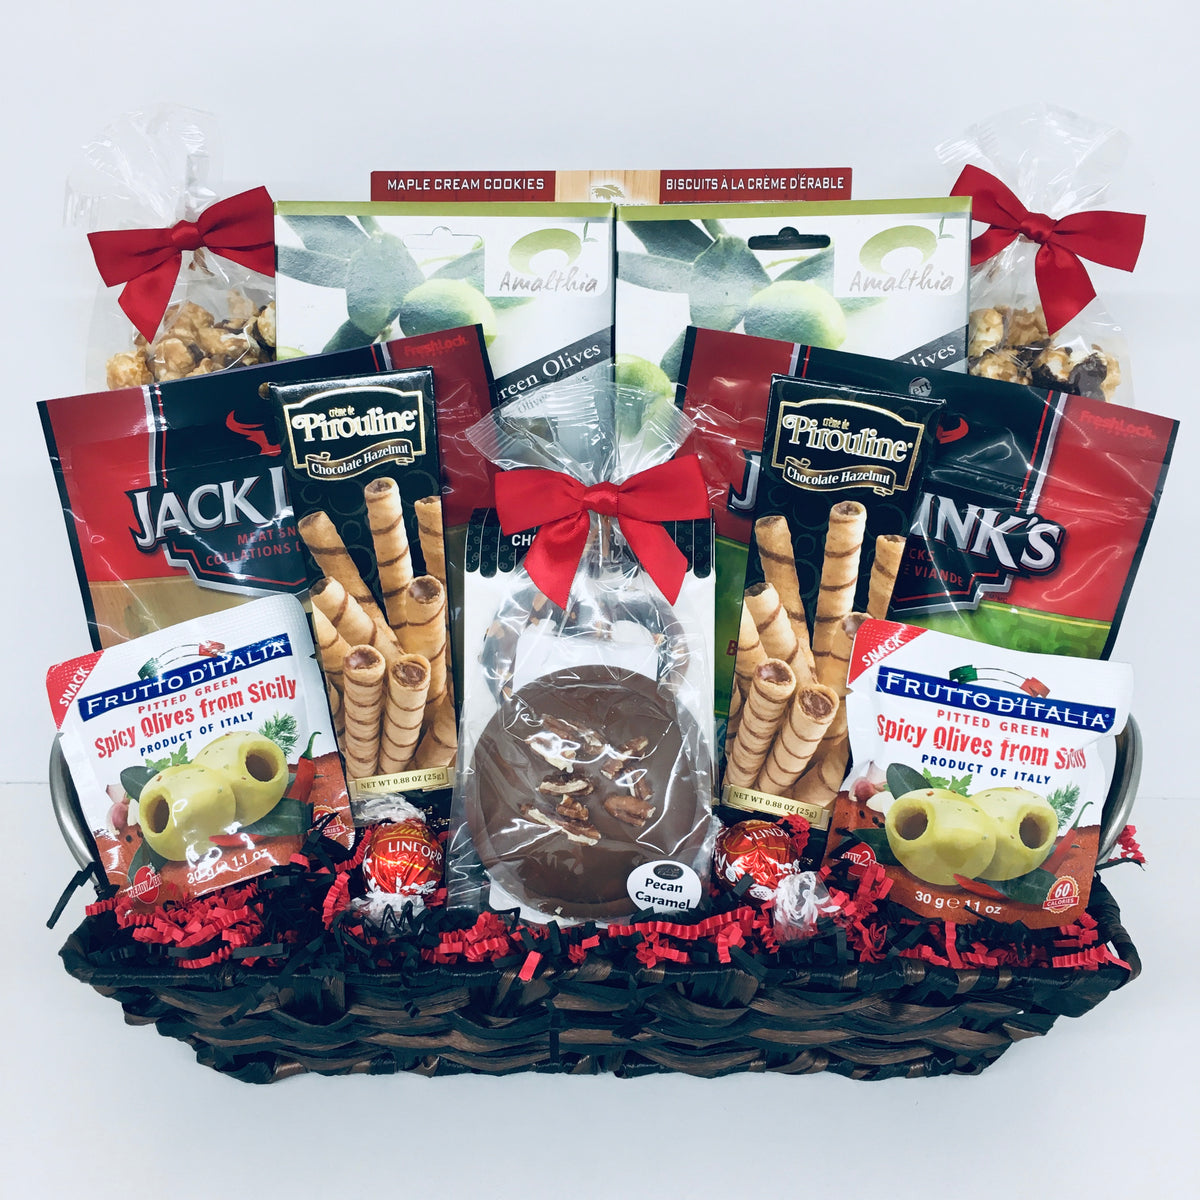 To Brighten Your Day Gift Basket